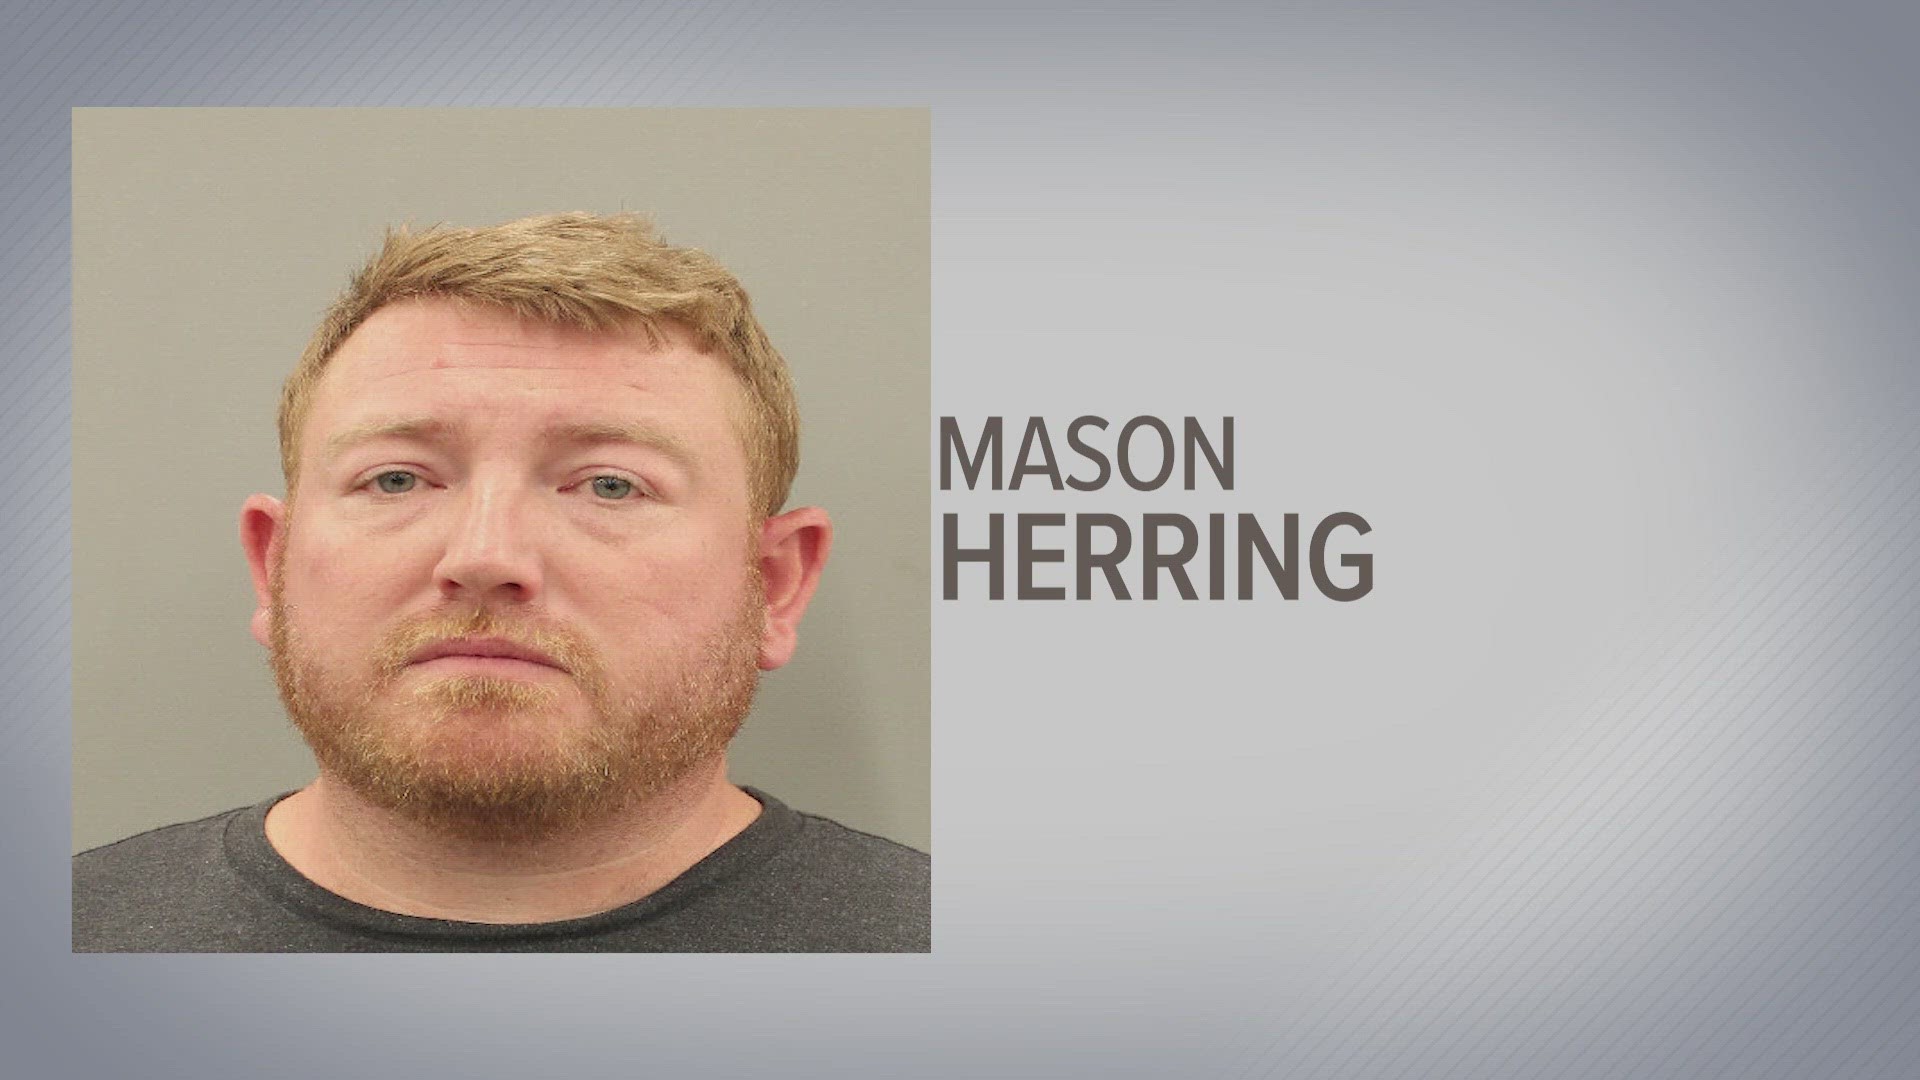 Mason Herring took a deal and pleaded guilty. Prosecutors said he secretly drugged his pregnant wife's drinks to induce an abortion.